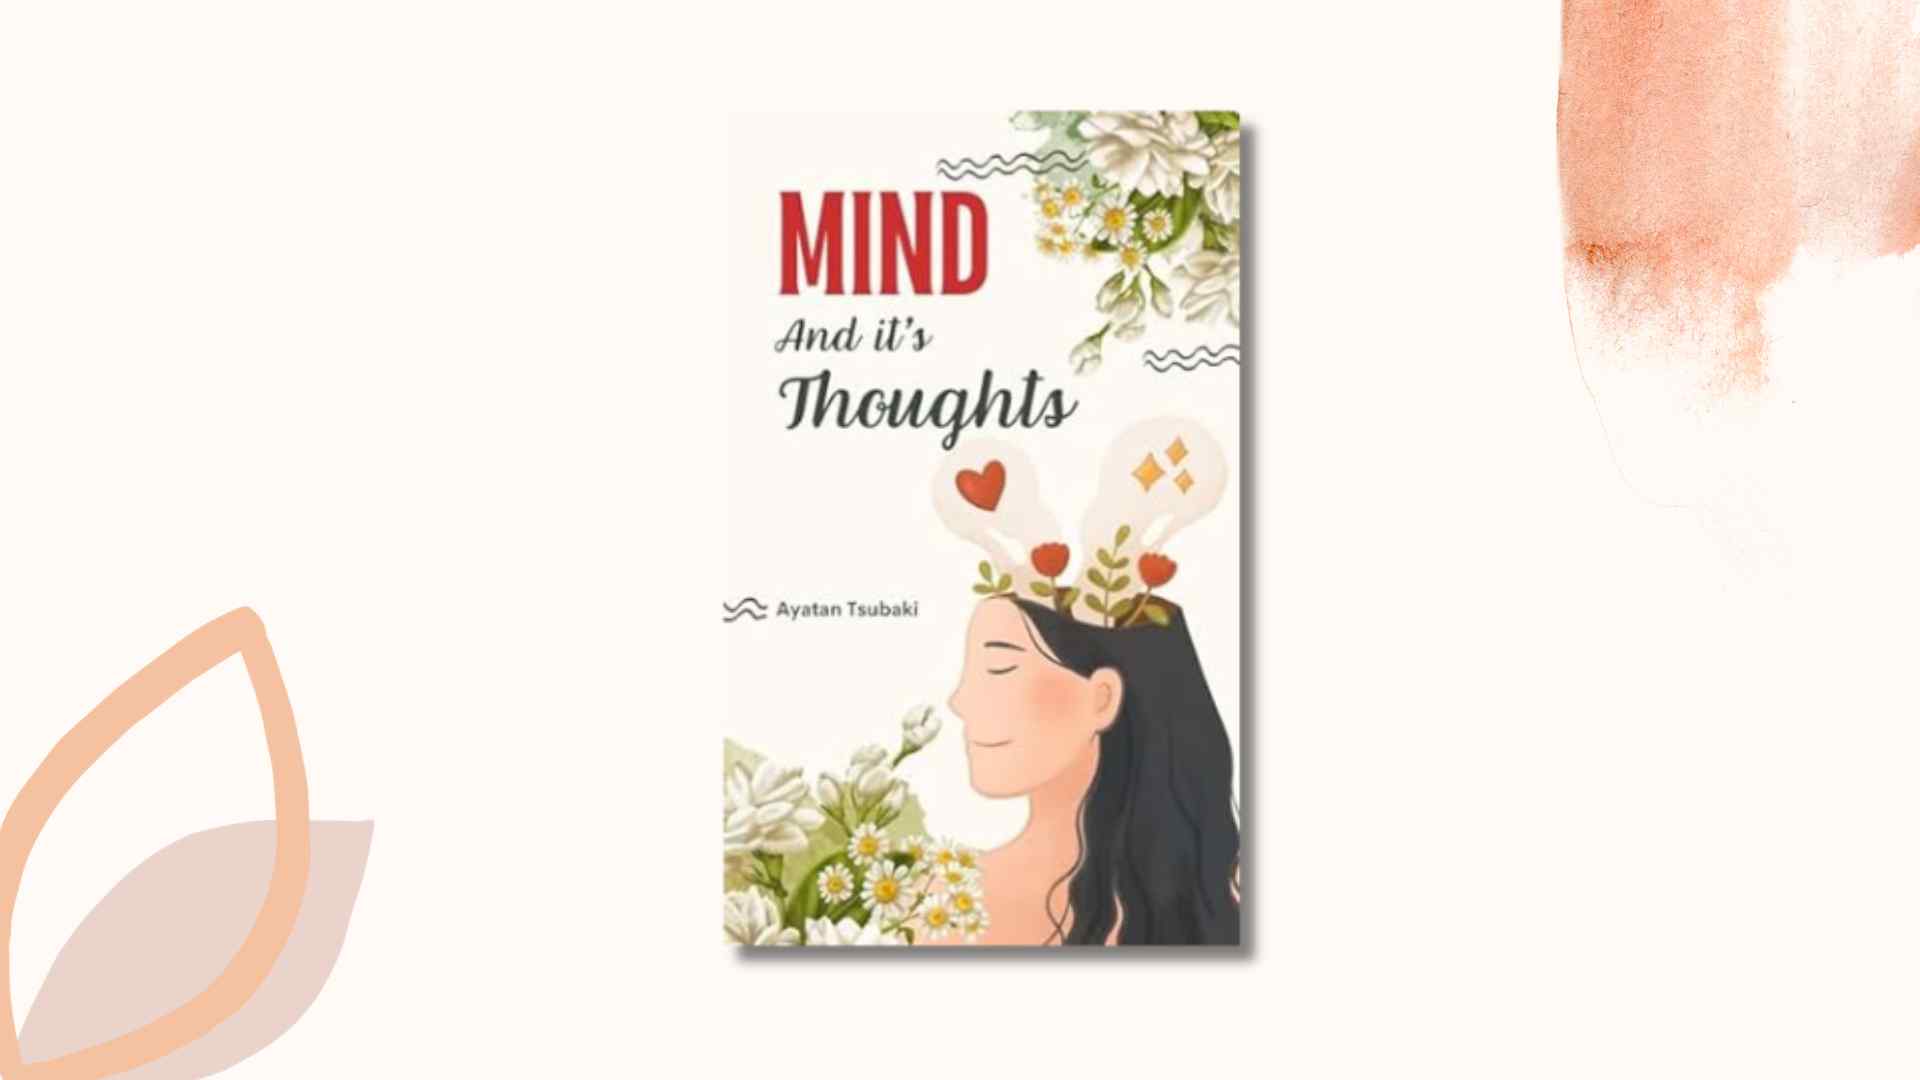 Ayatan Tsubaki’s “Mind And Its Thoughts” is a captivating exploration of the human psyche through the lens of poetry.